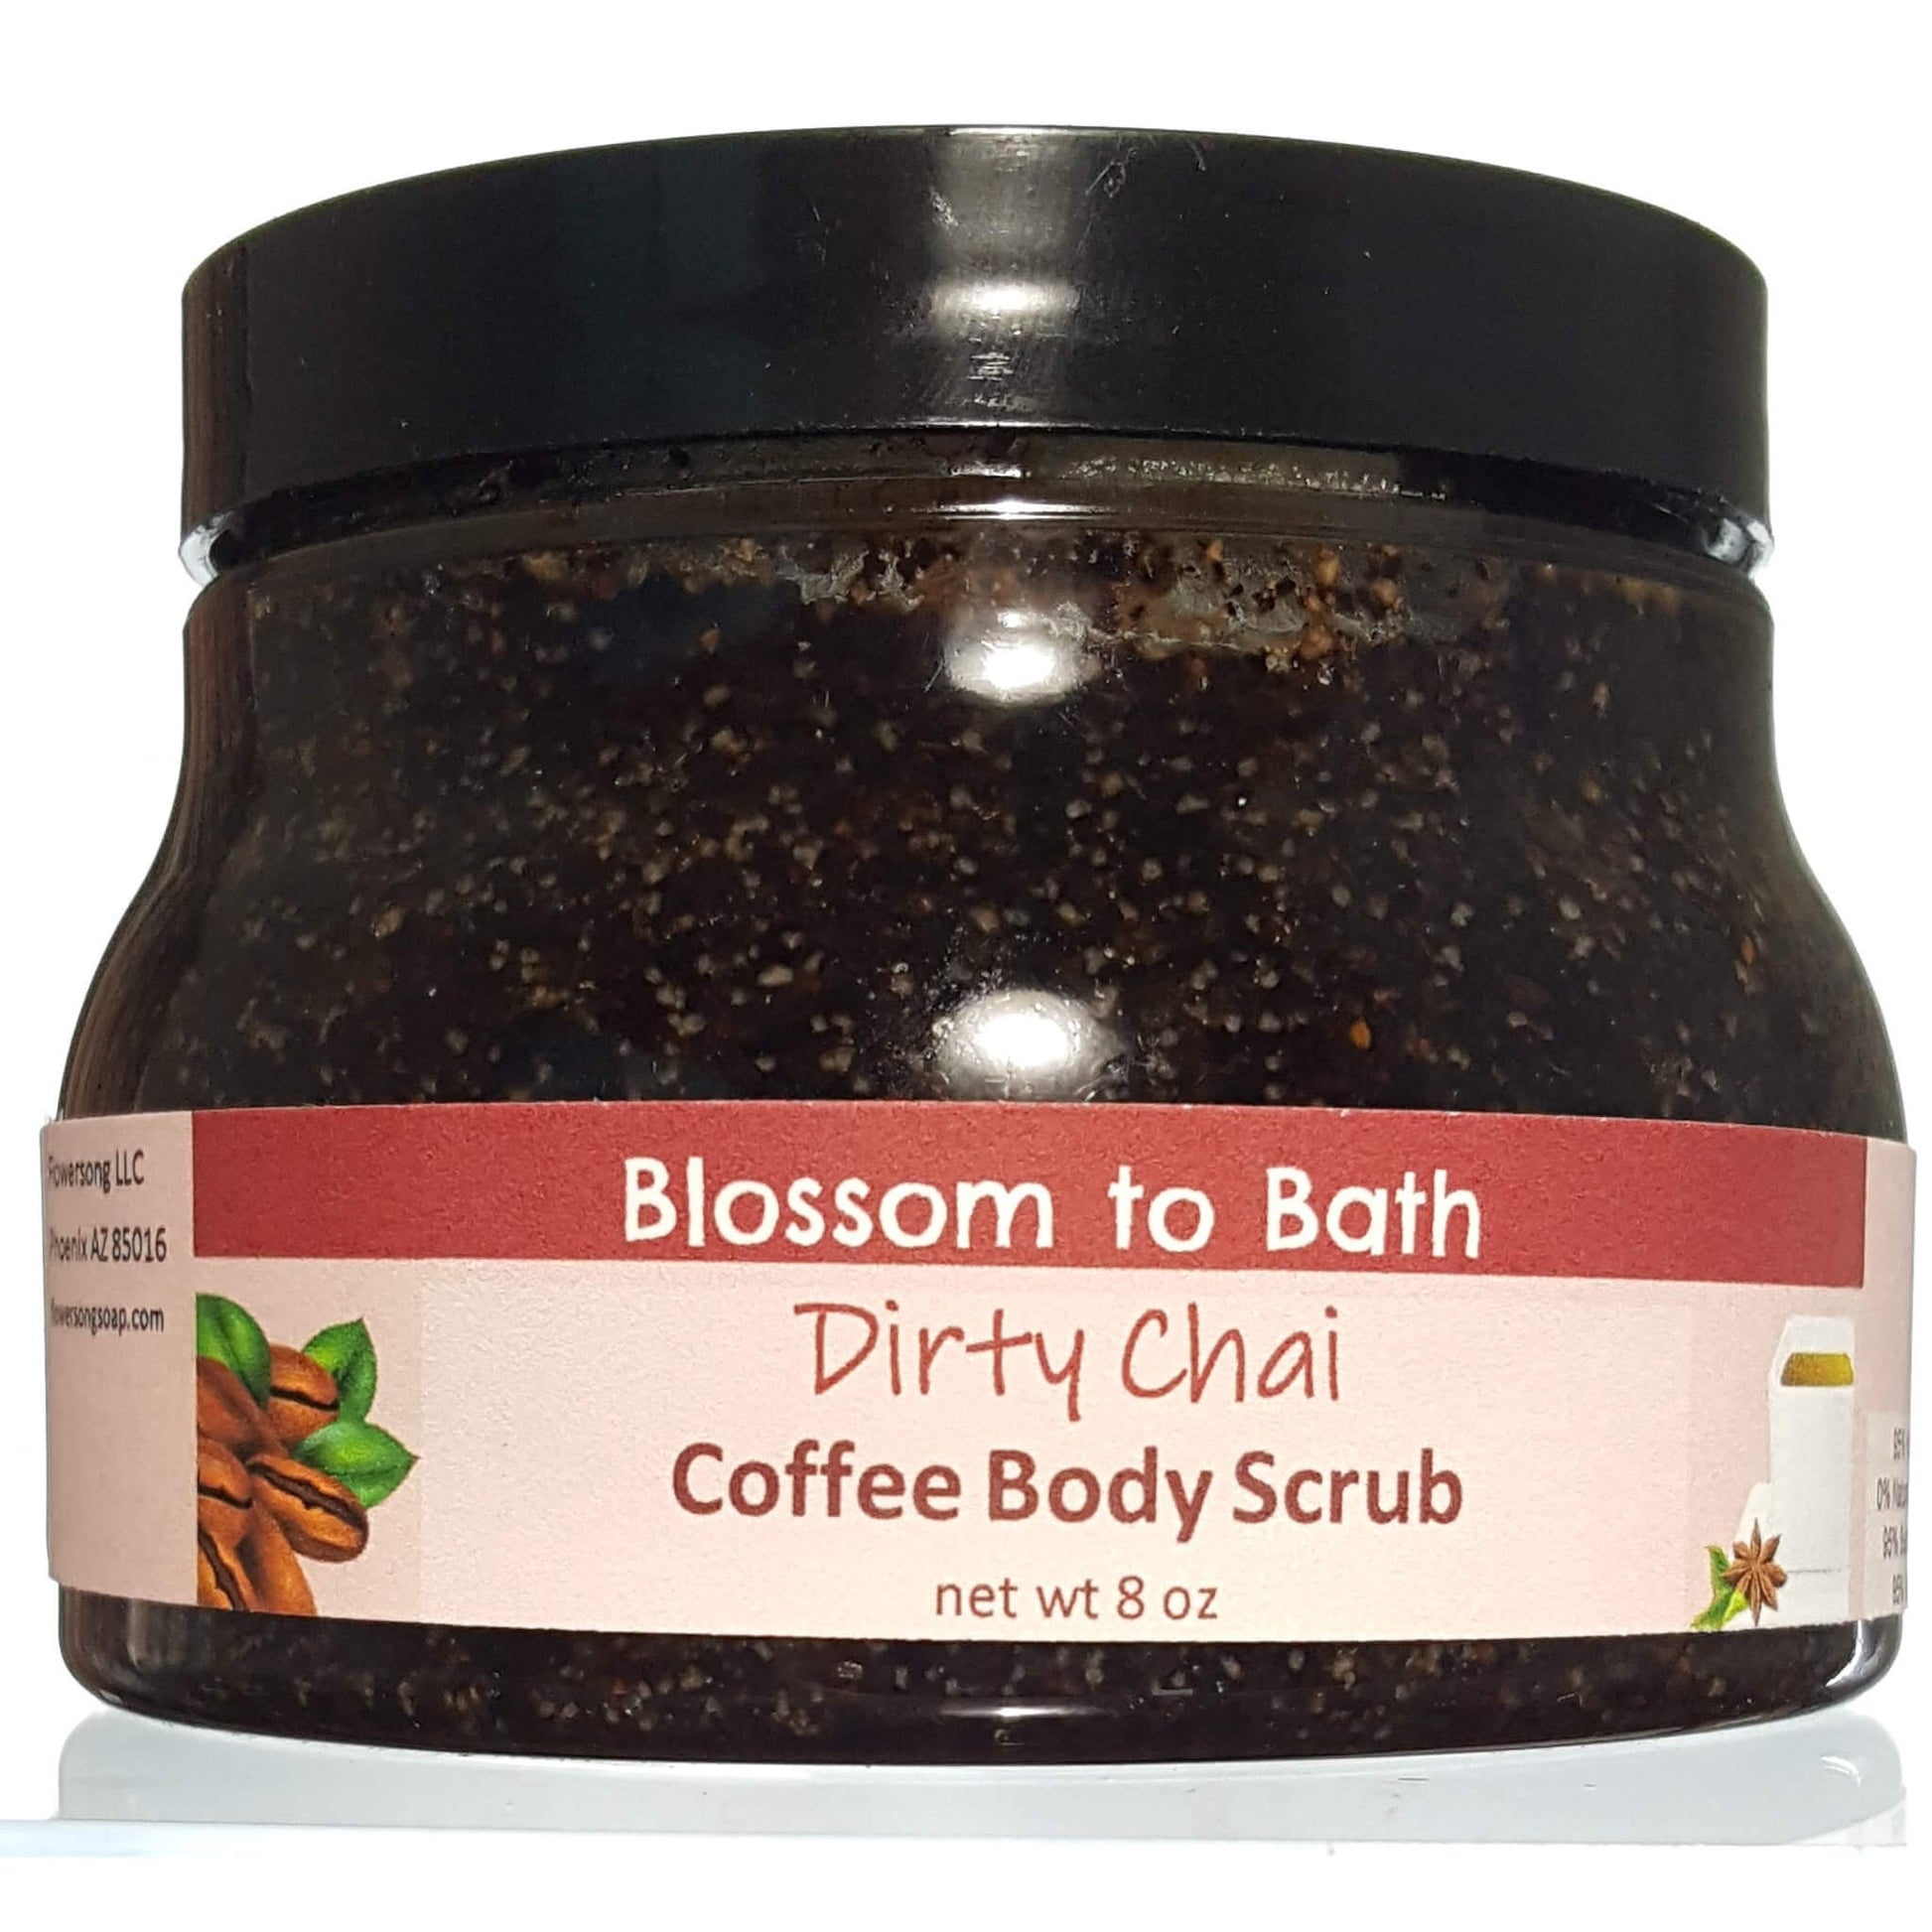 Buy Blossom to Bath Dirty Chai Coffee Body Scrub from Flowersong Soap Studio.  Polish skin to a refreshed natural glow while enjoying your favorite mouth-watering gourmet coffee aroma  A shot of rich espresso in a swirl of exotic warm clove and cardamom.